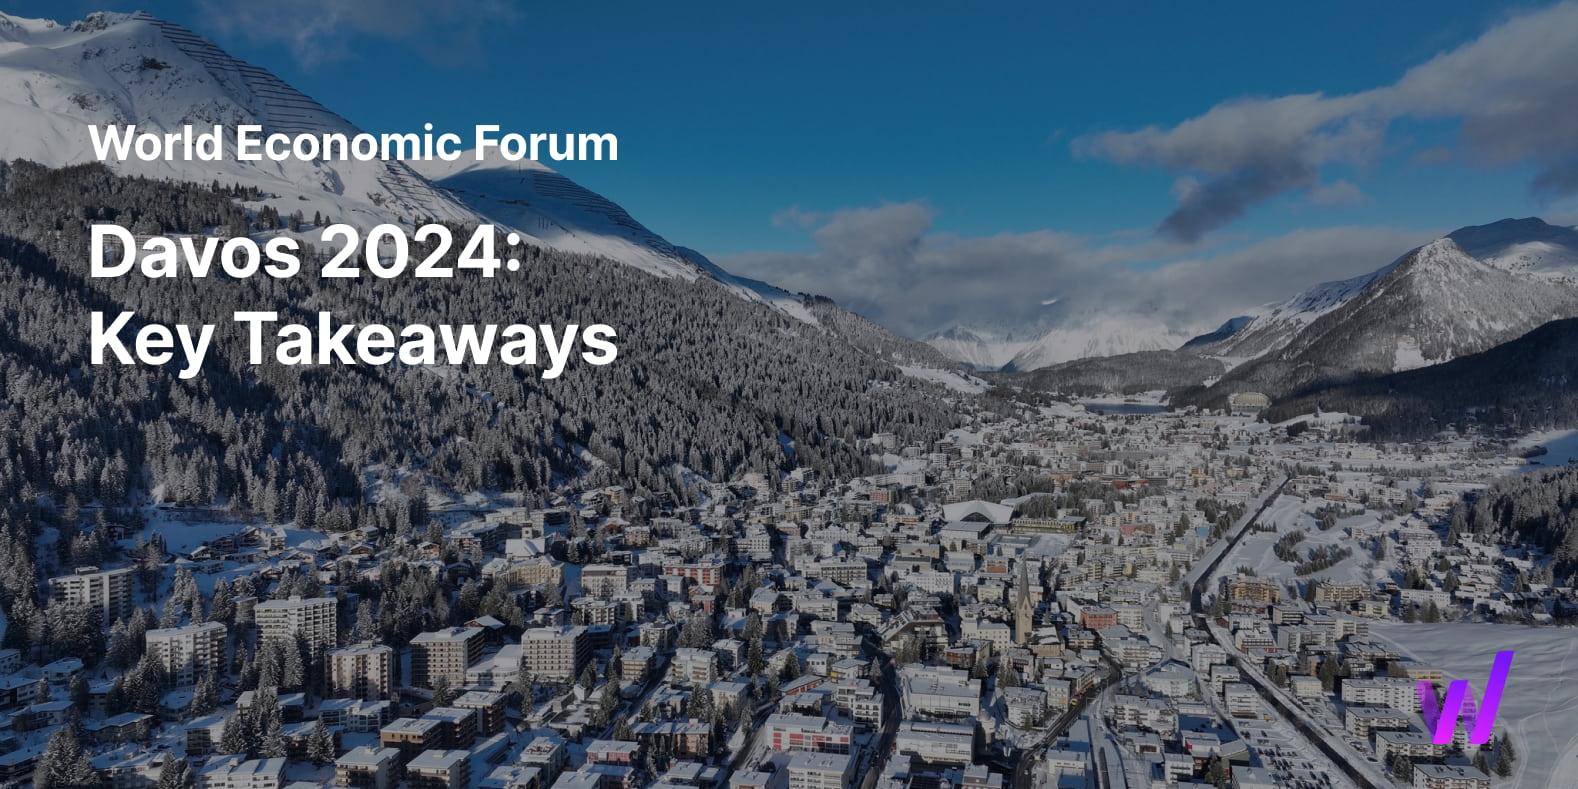 Davos 2024 Ski place World Economic Forum made their 54th annual meeting with a rebuilding trust theme